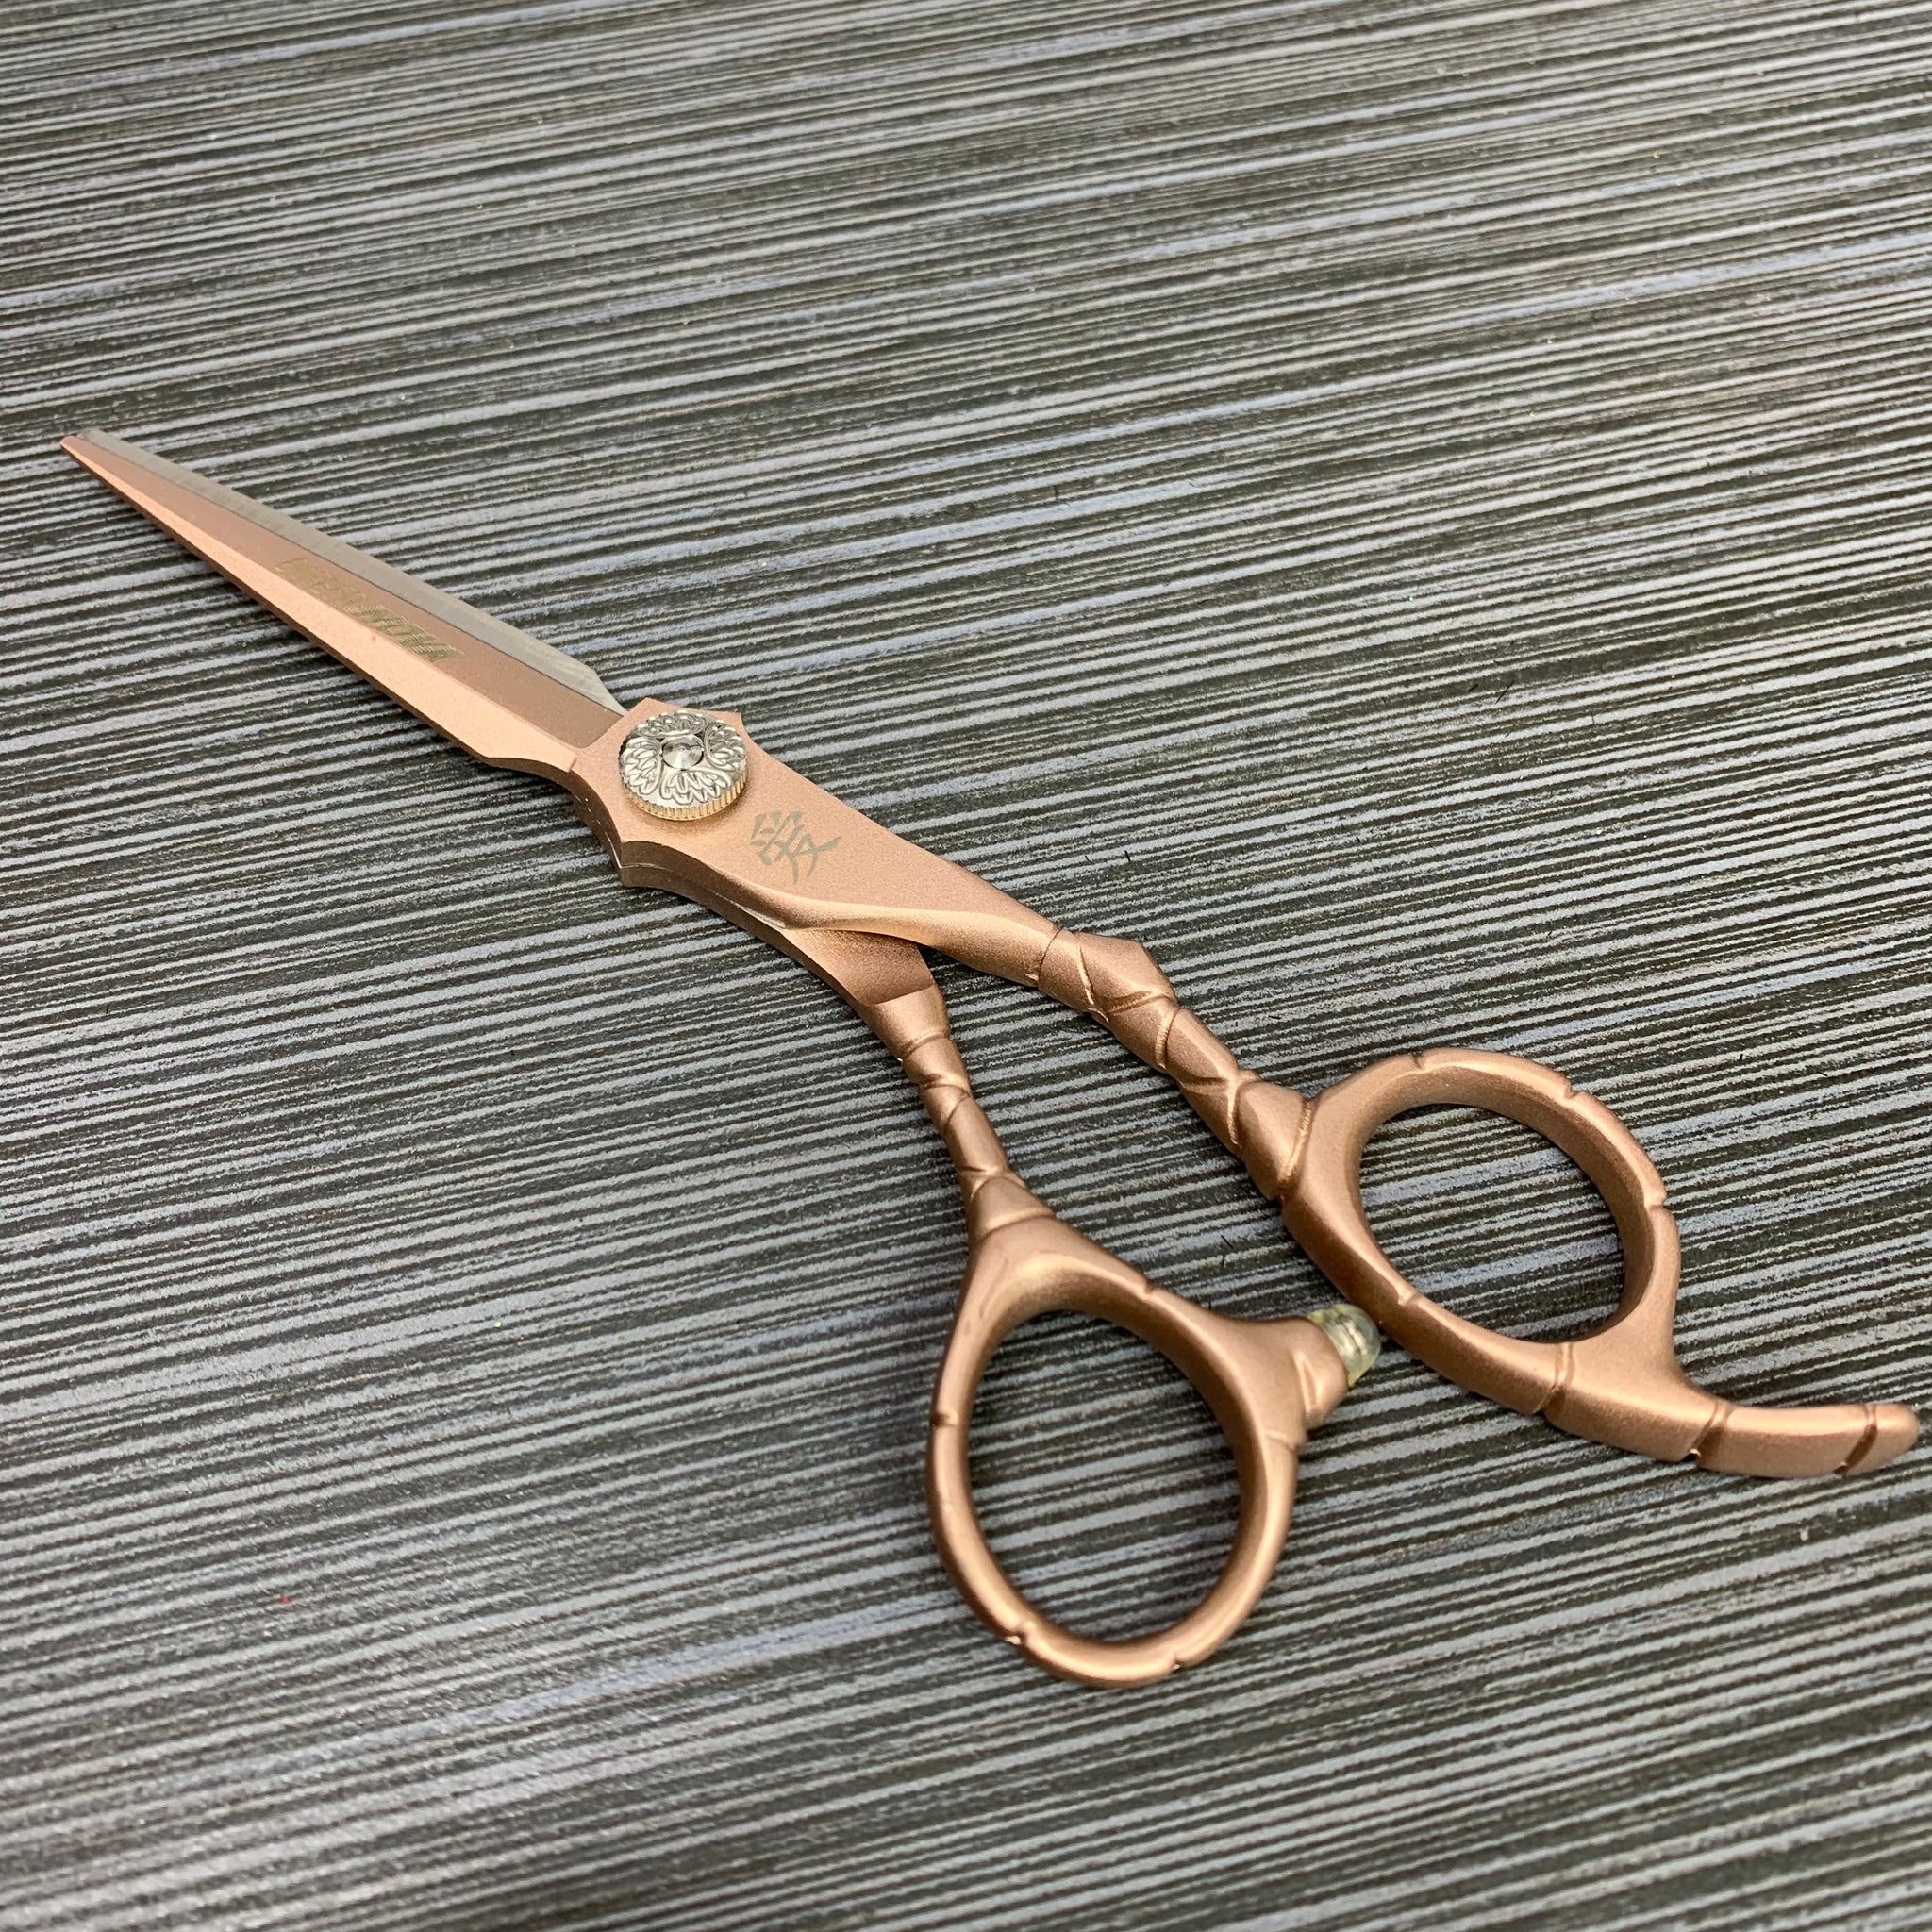 divine being, rose gold, thinning shear, lightweight, adjustable tension, scissors